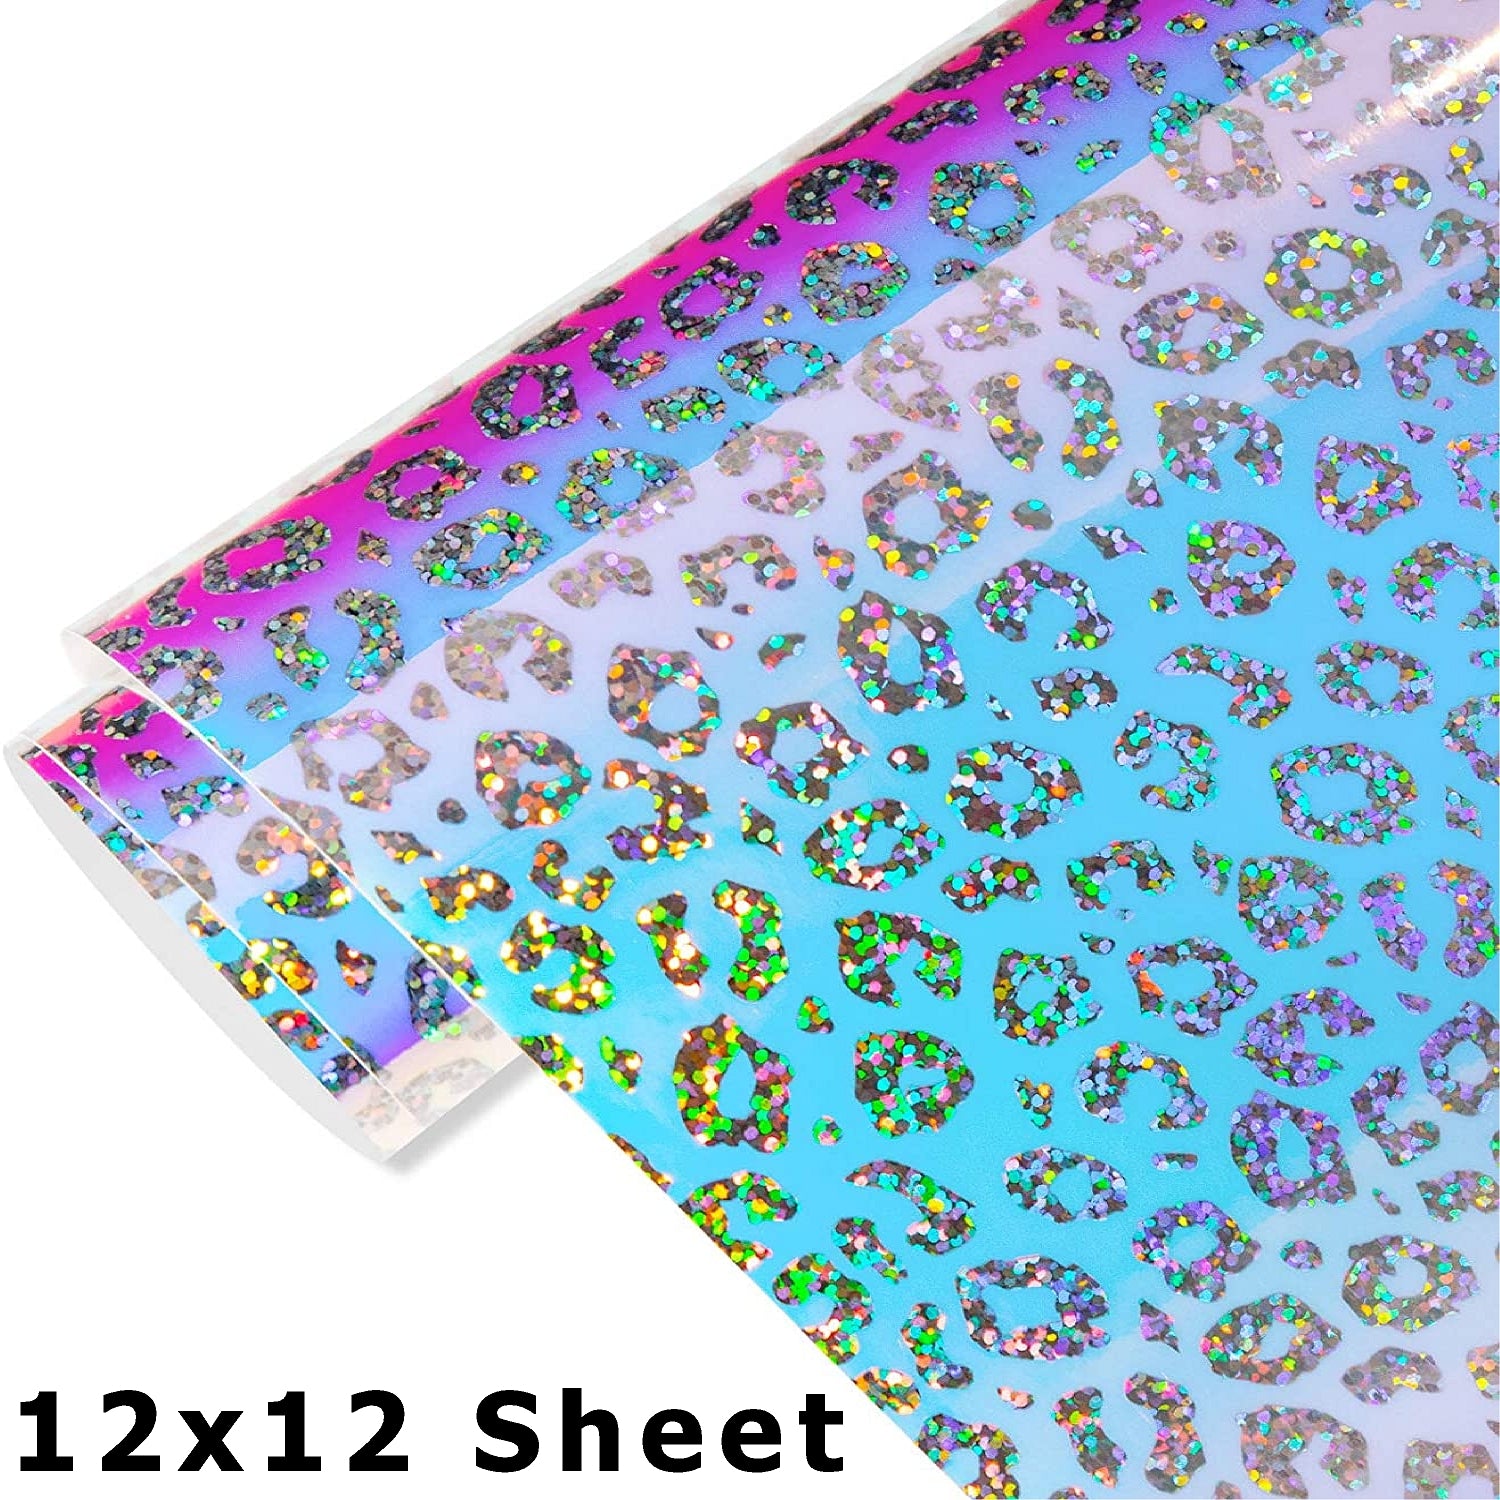 Teckwrap Holographic Adhesive Vinyl Stickers (12x12) DIY Crafting & Hobby  Store